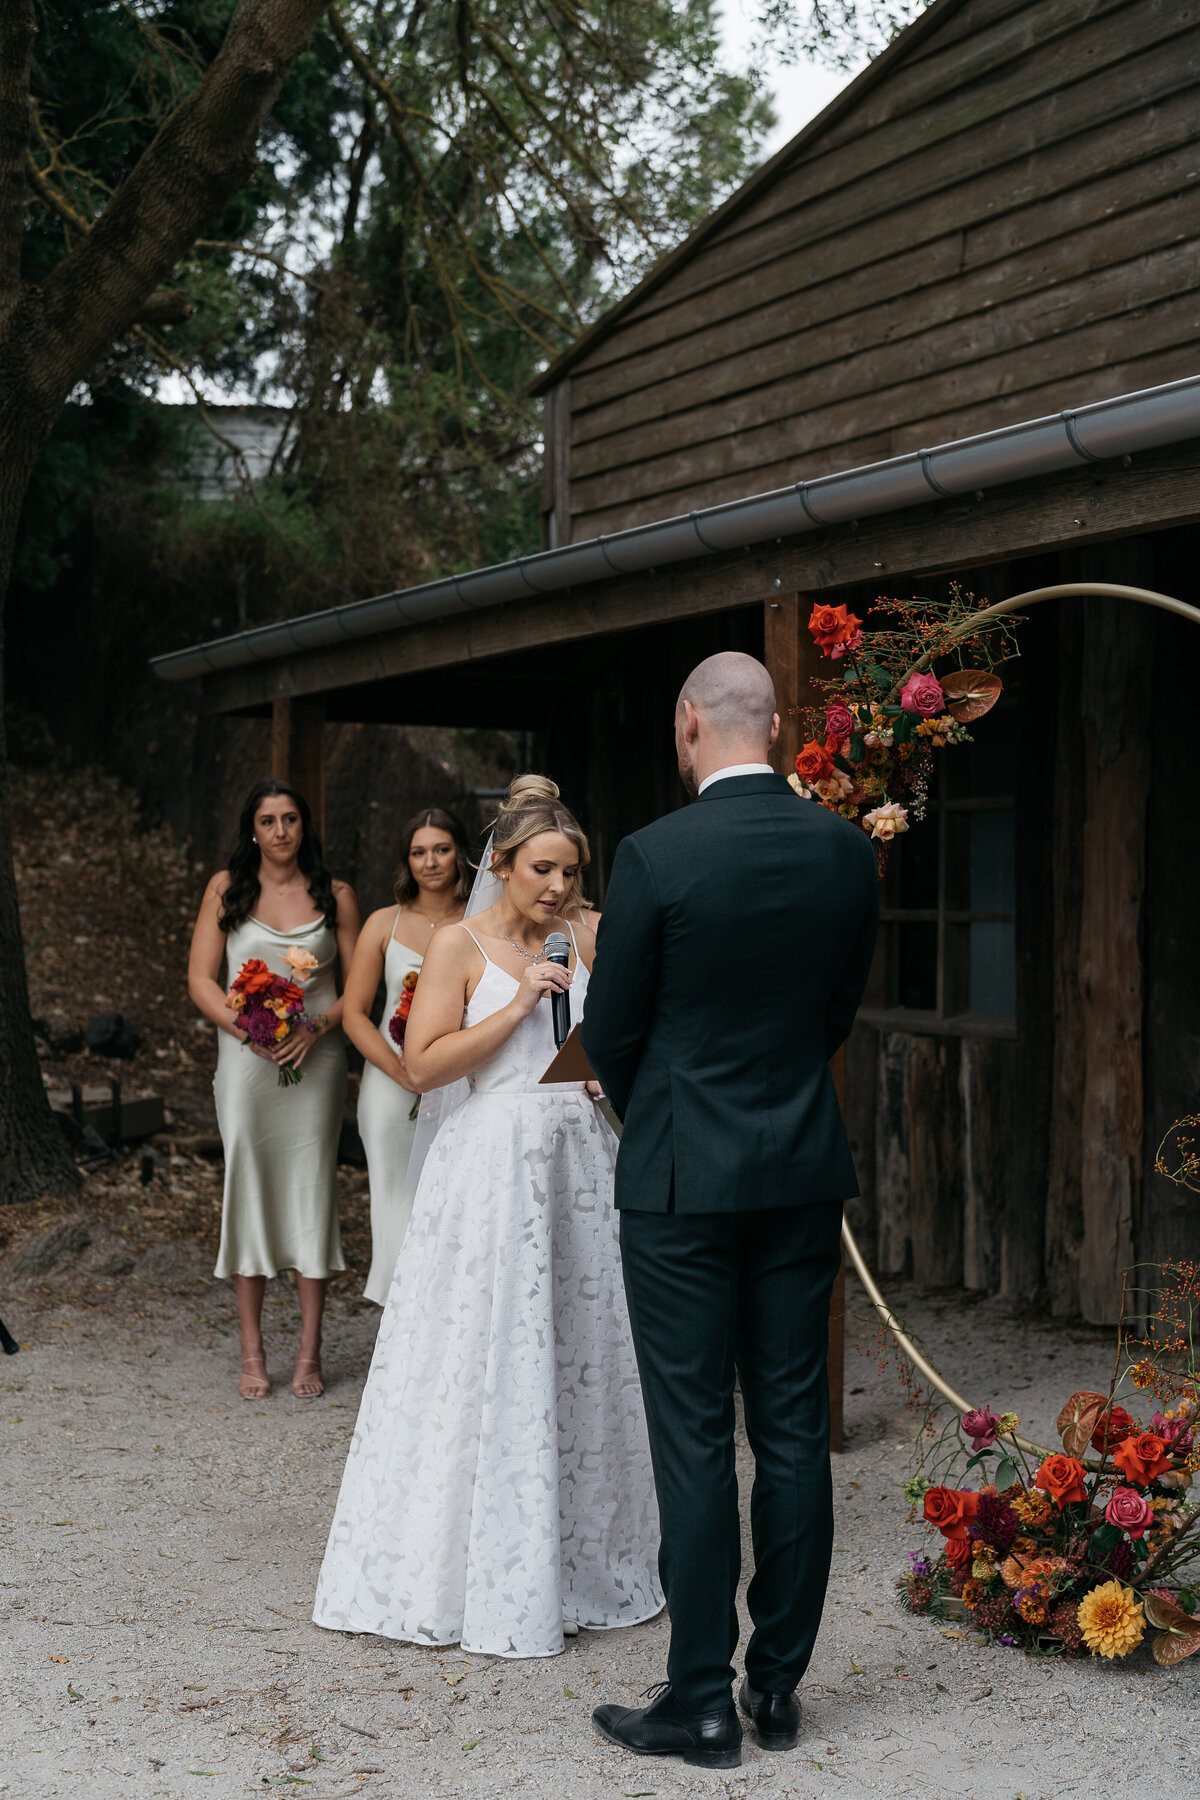 Courtney Laura Photography, Yarra Valley Wedding Photographer, The Farm Yarra Valley, Cassie and Kieren-457